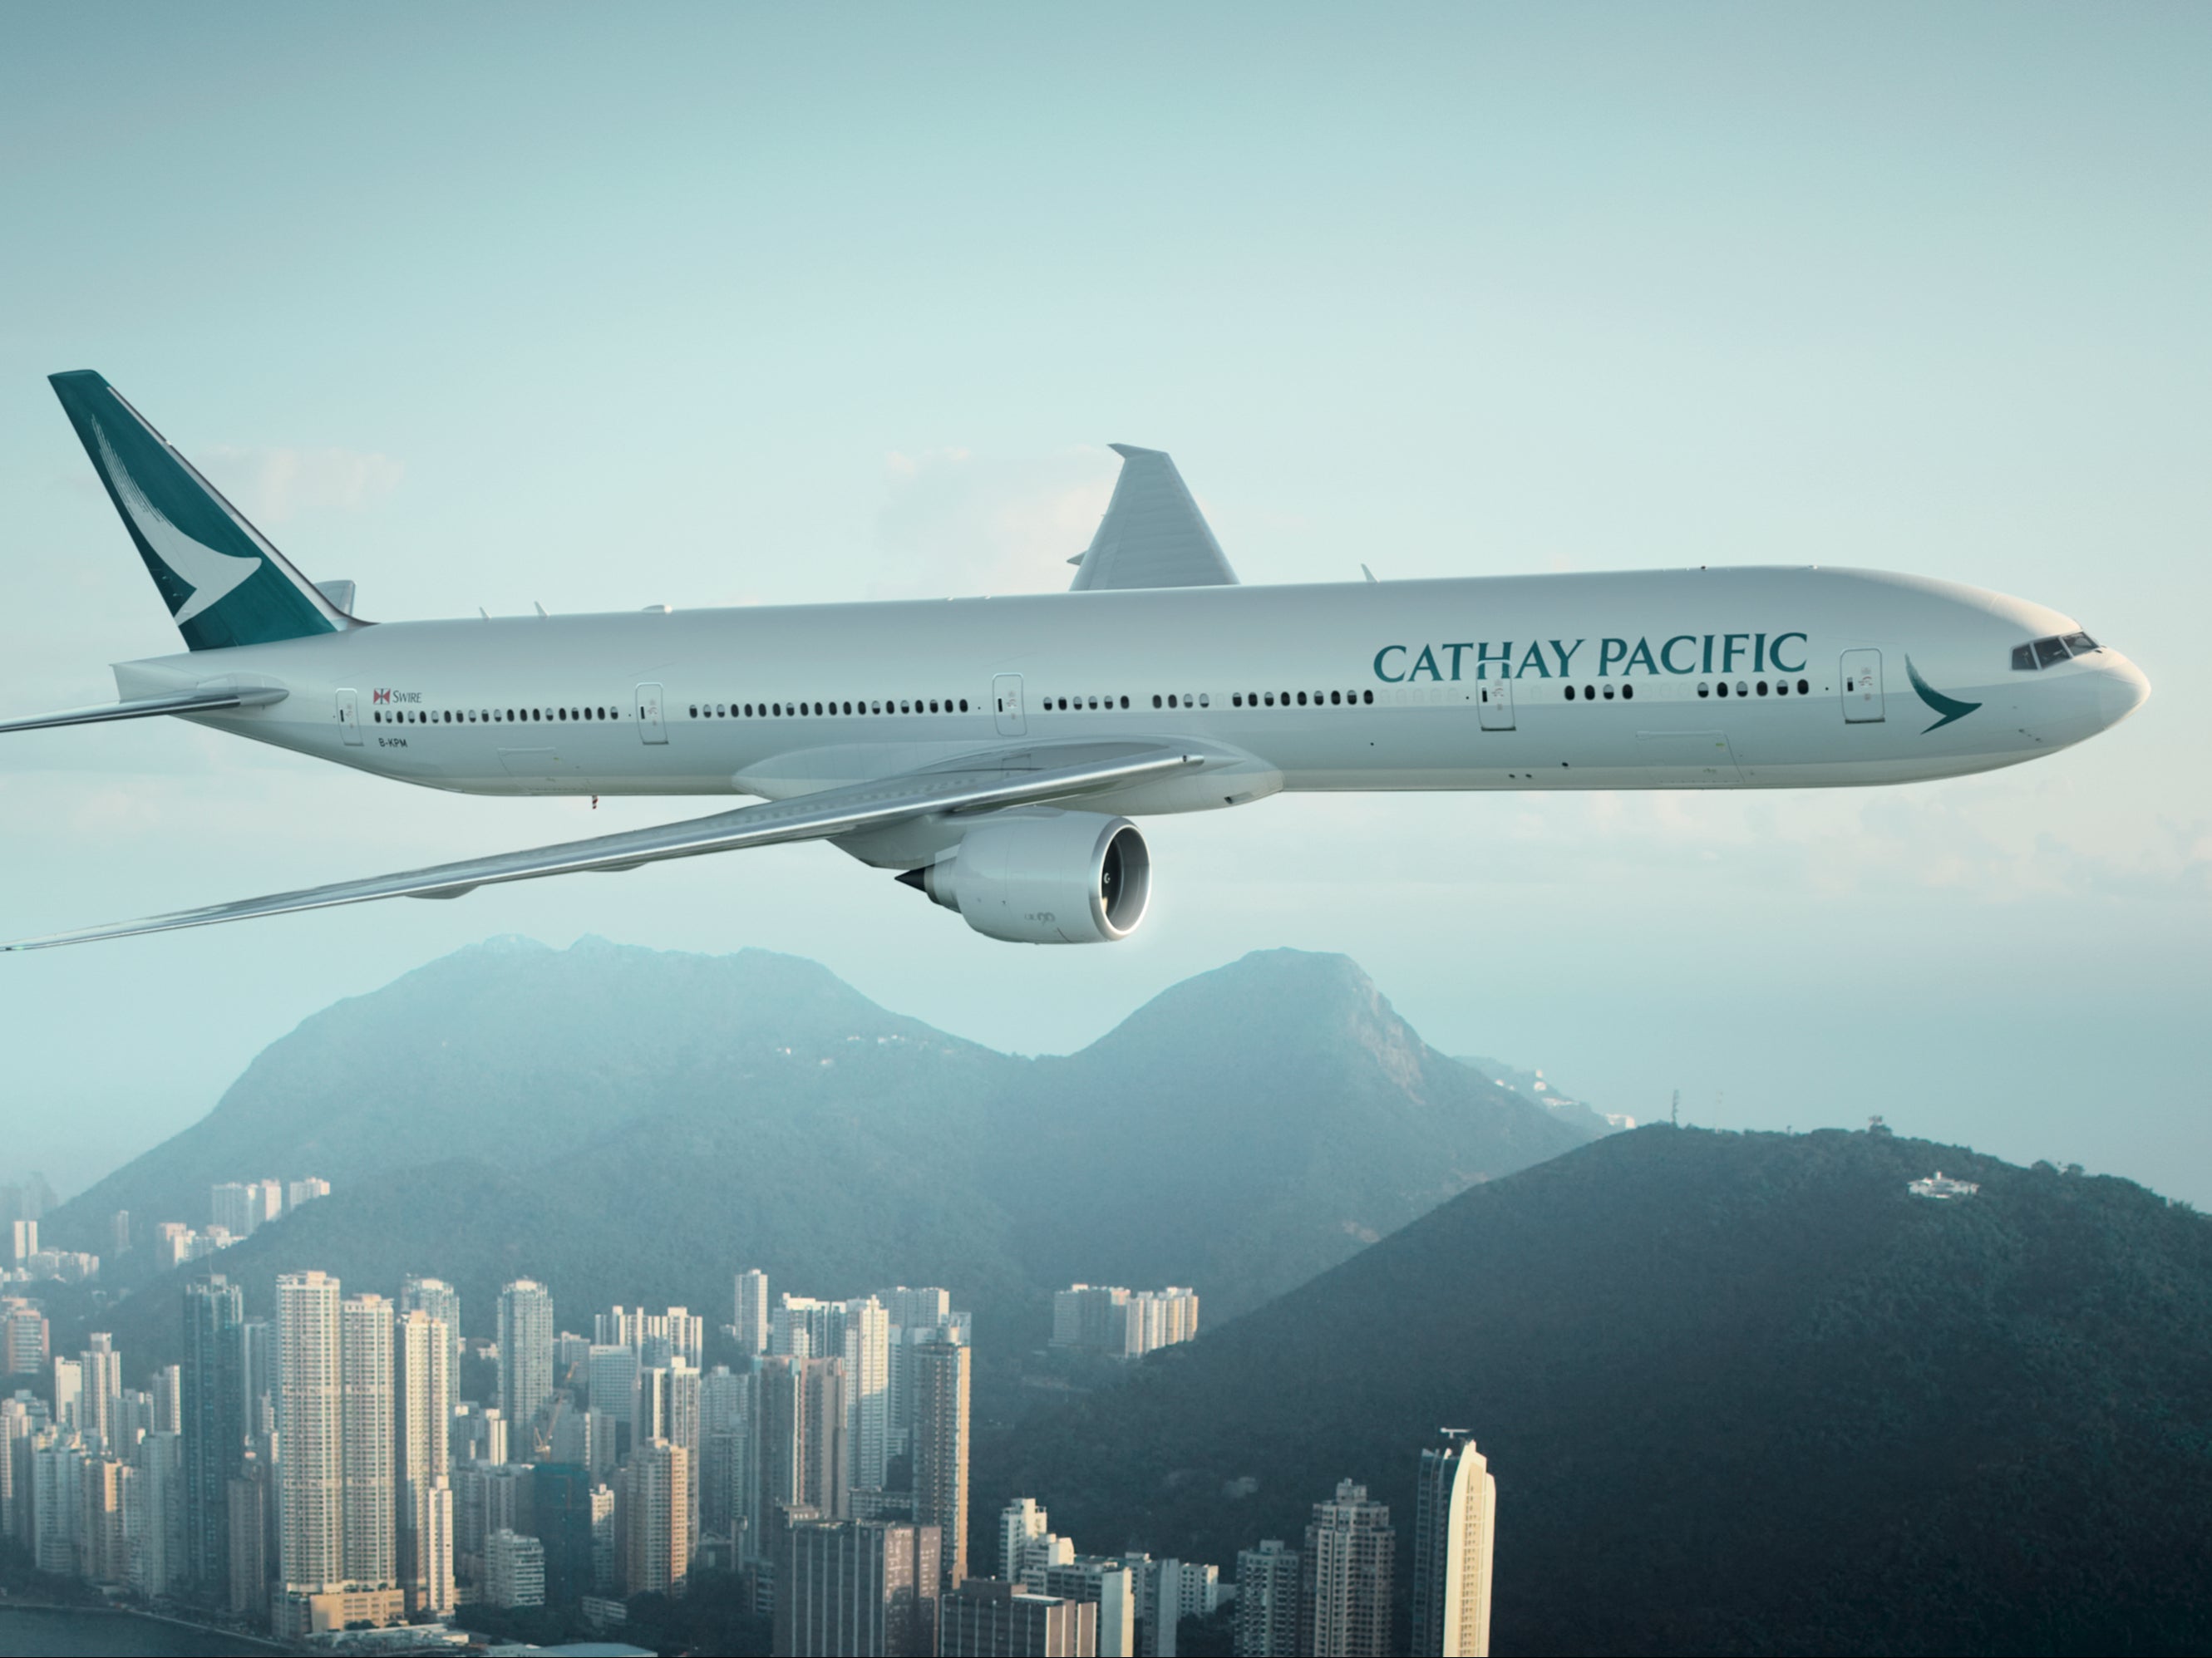 Landing soon? Cathay Pacific Boeing 777 above Hong Kong